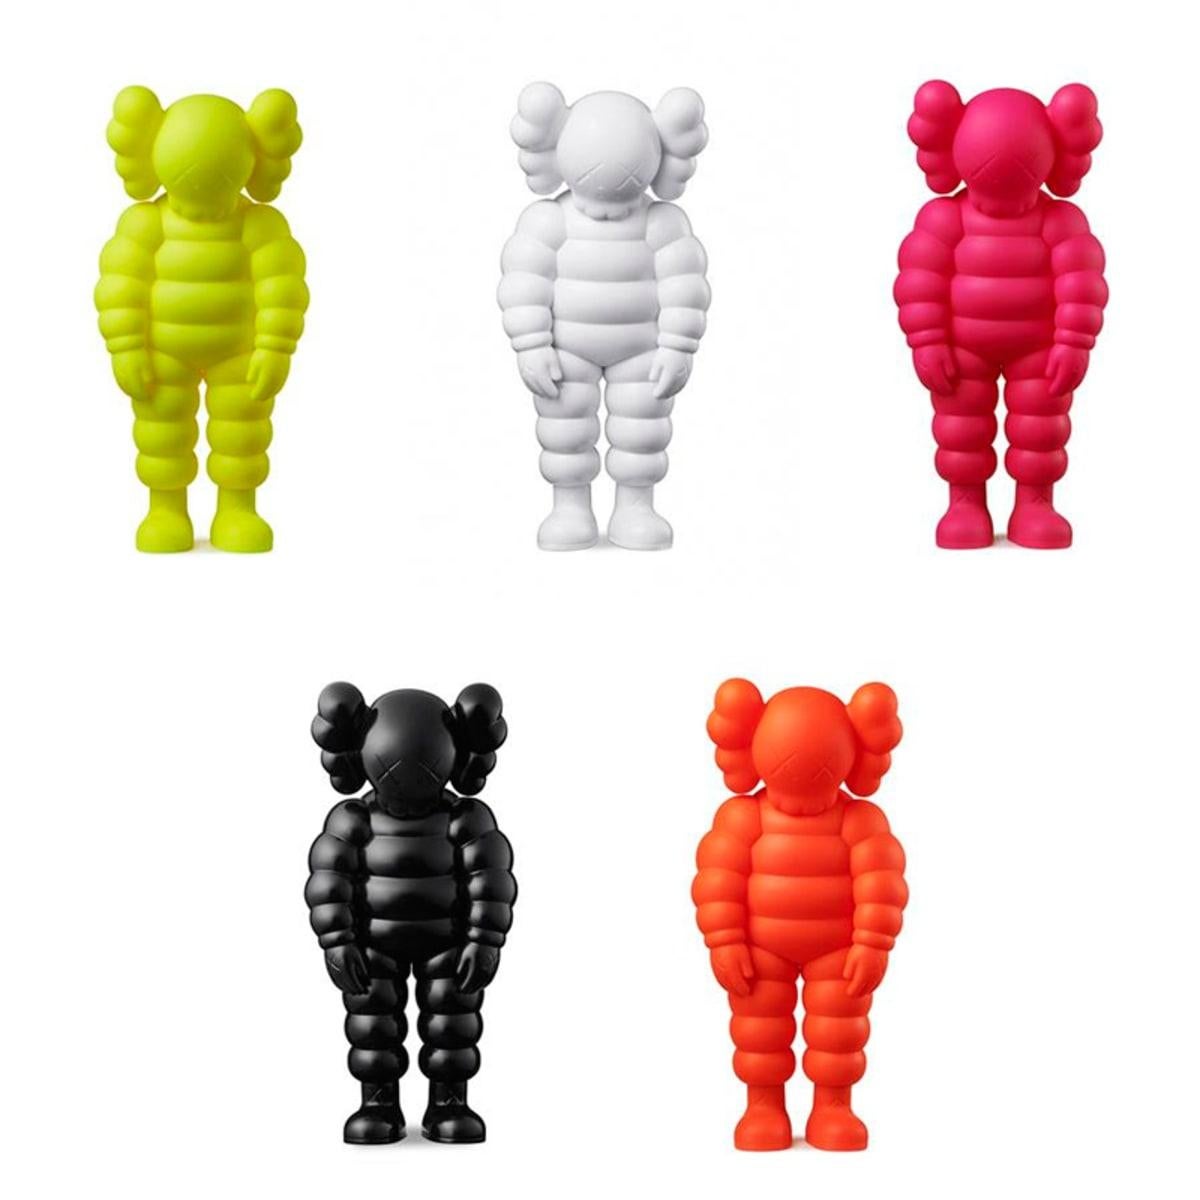 KAWS, What Party - Chum (Full set of 5), Sculpture, 2020 For Sale 5